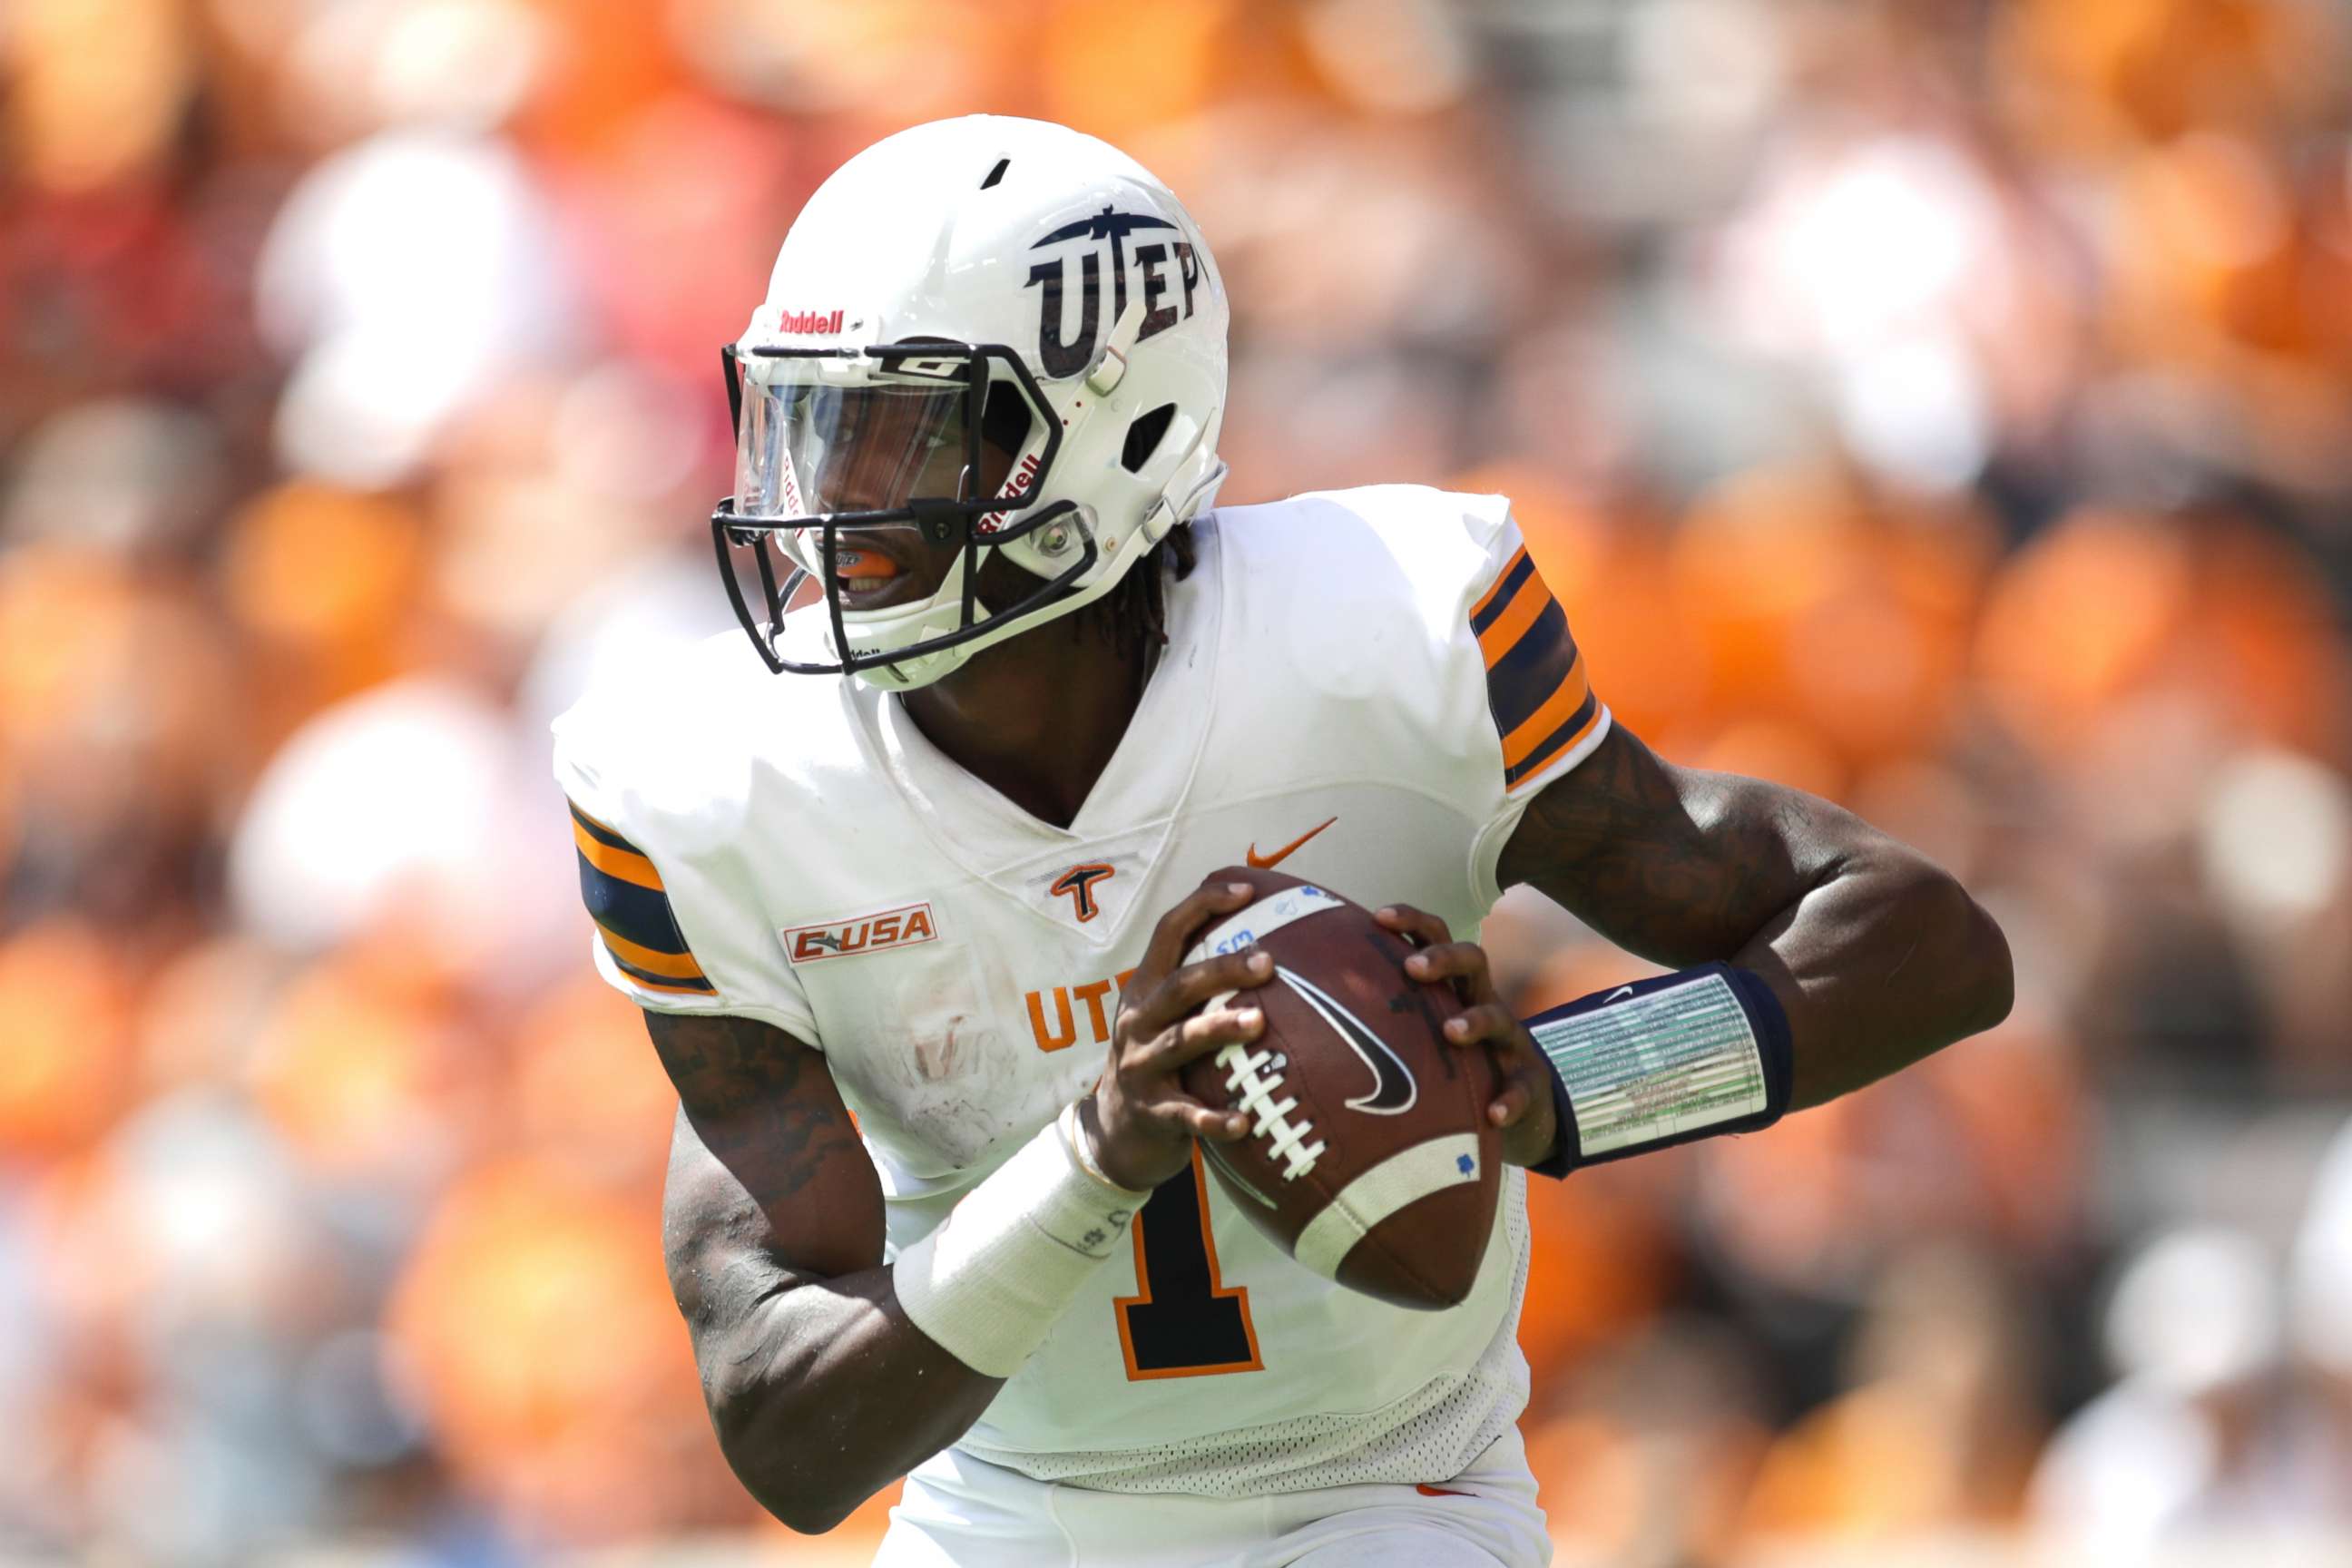 PHOTO: Quarterback Kai Locksley #1 of the UTEP Miners looks to pass during the game between the UTEP Miners and Tennessee Volunteers at Neyland Stadium, Sep. 15, 2018 in Knoxville, Tenn.